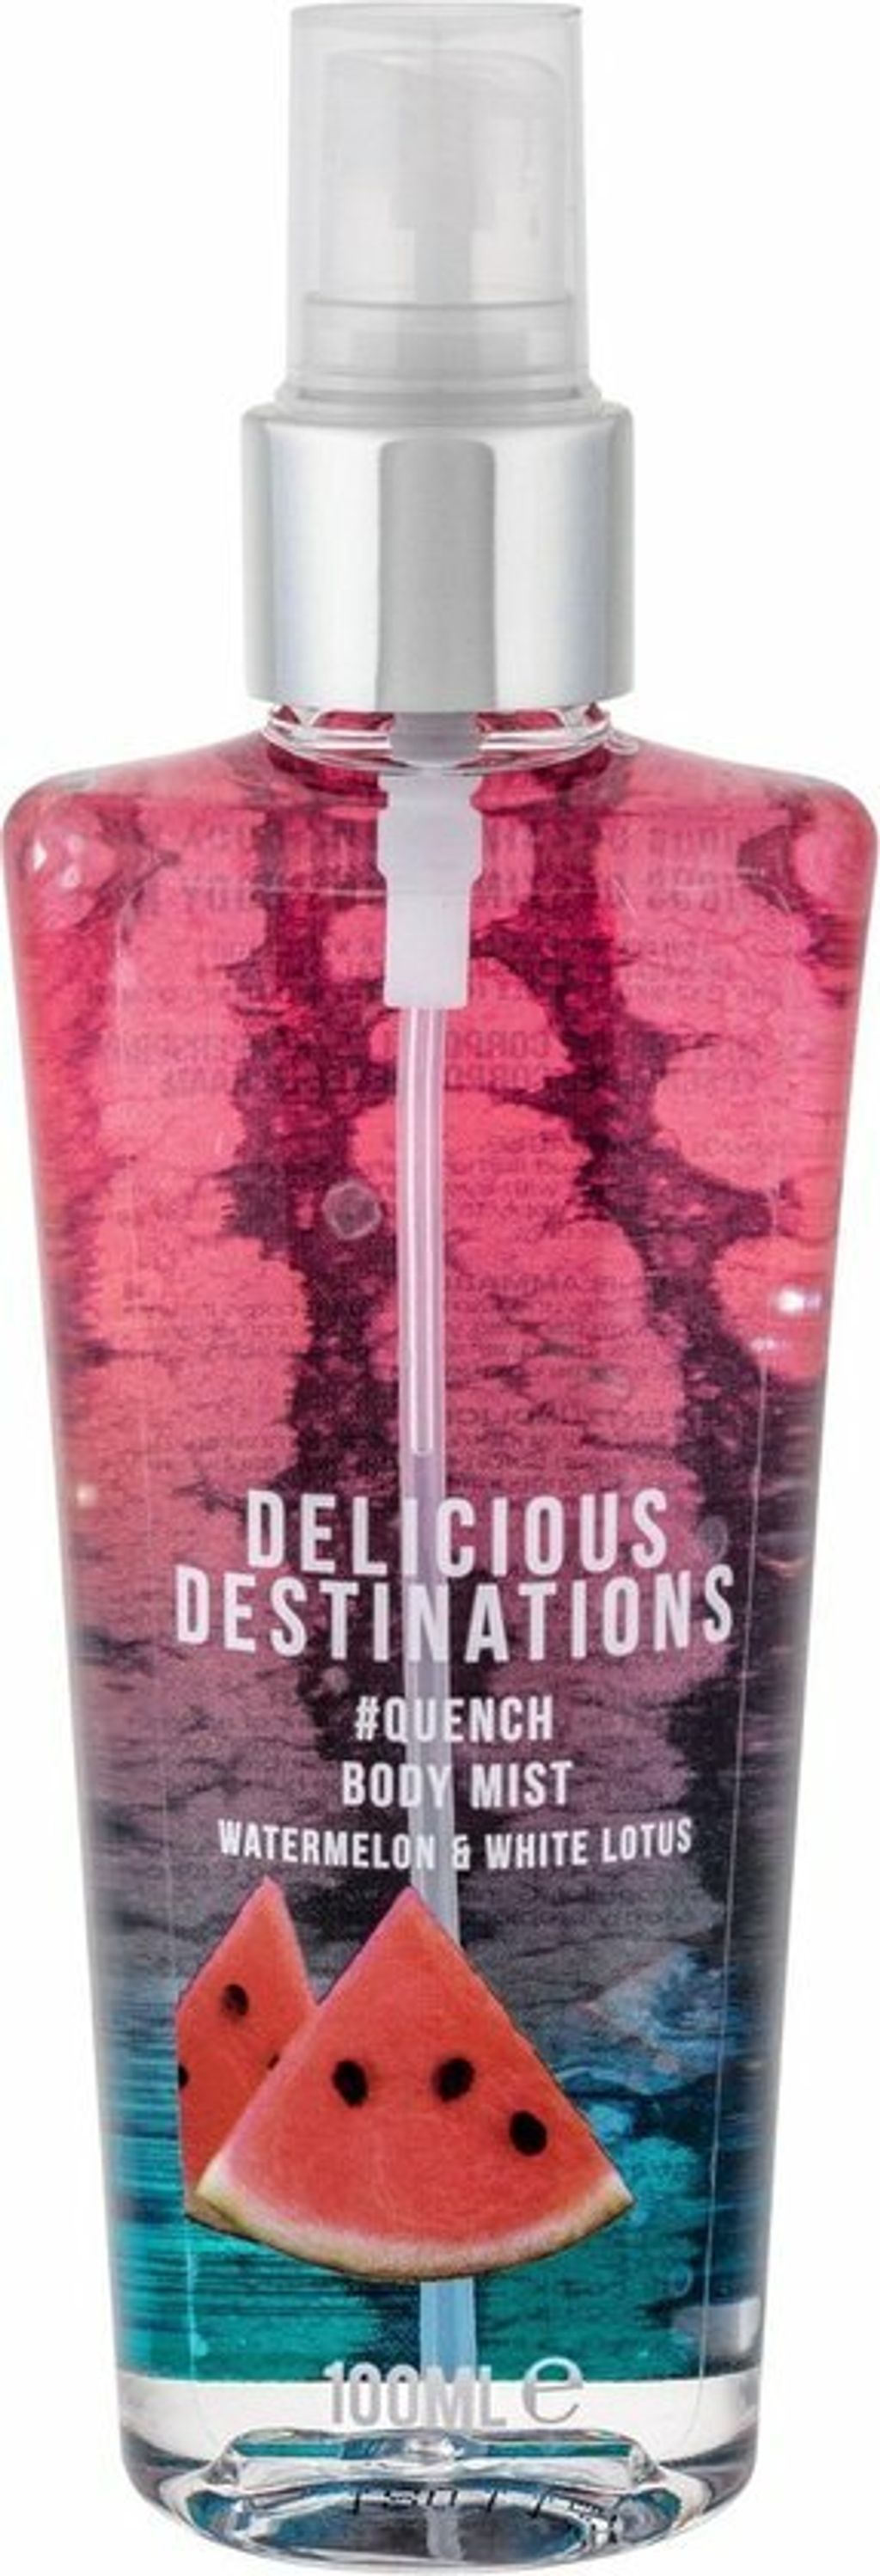 Delicious Destinations Mists Quench.jpg